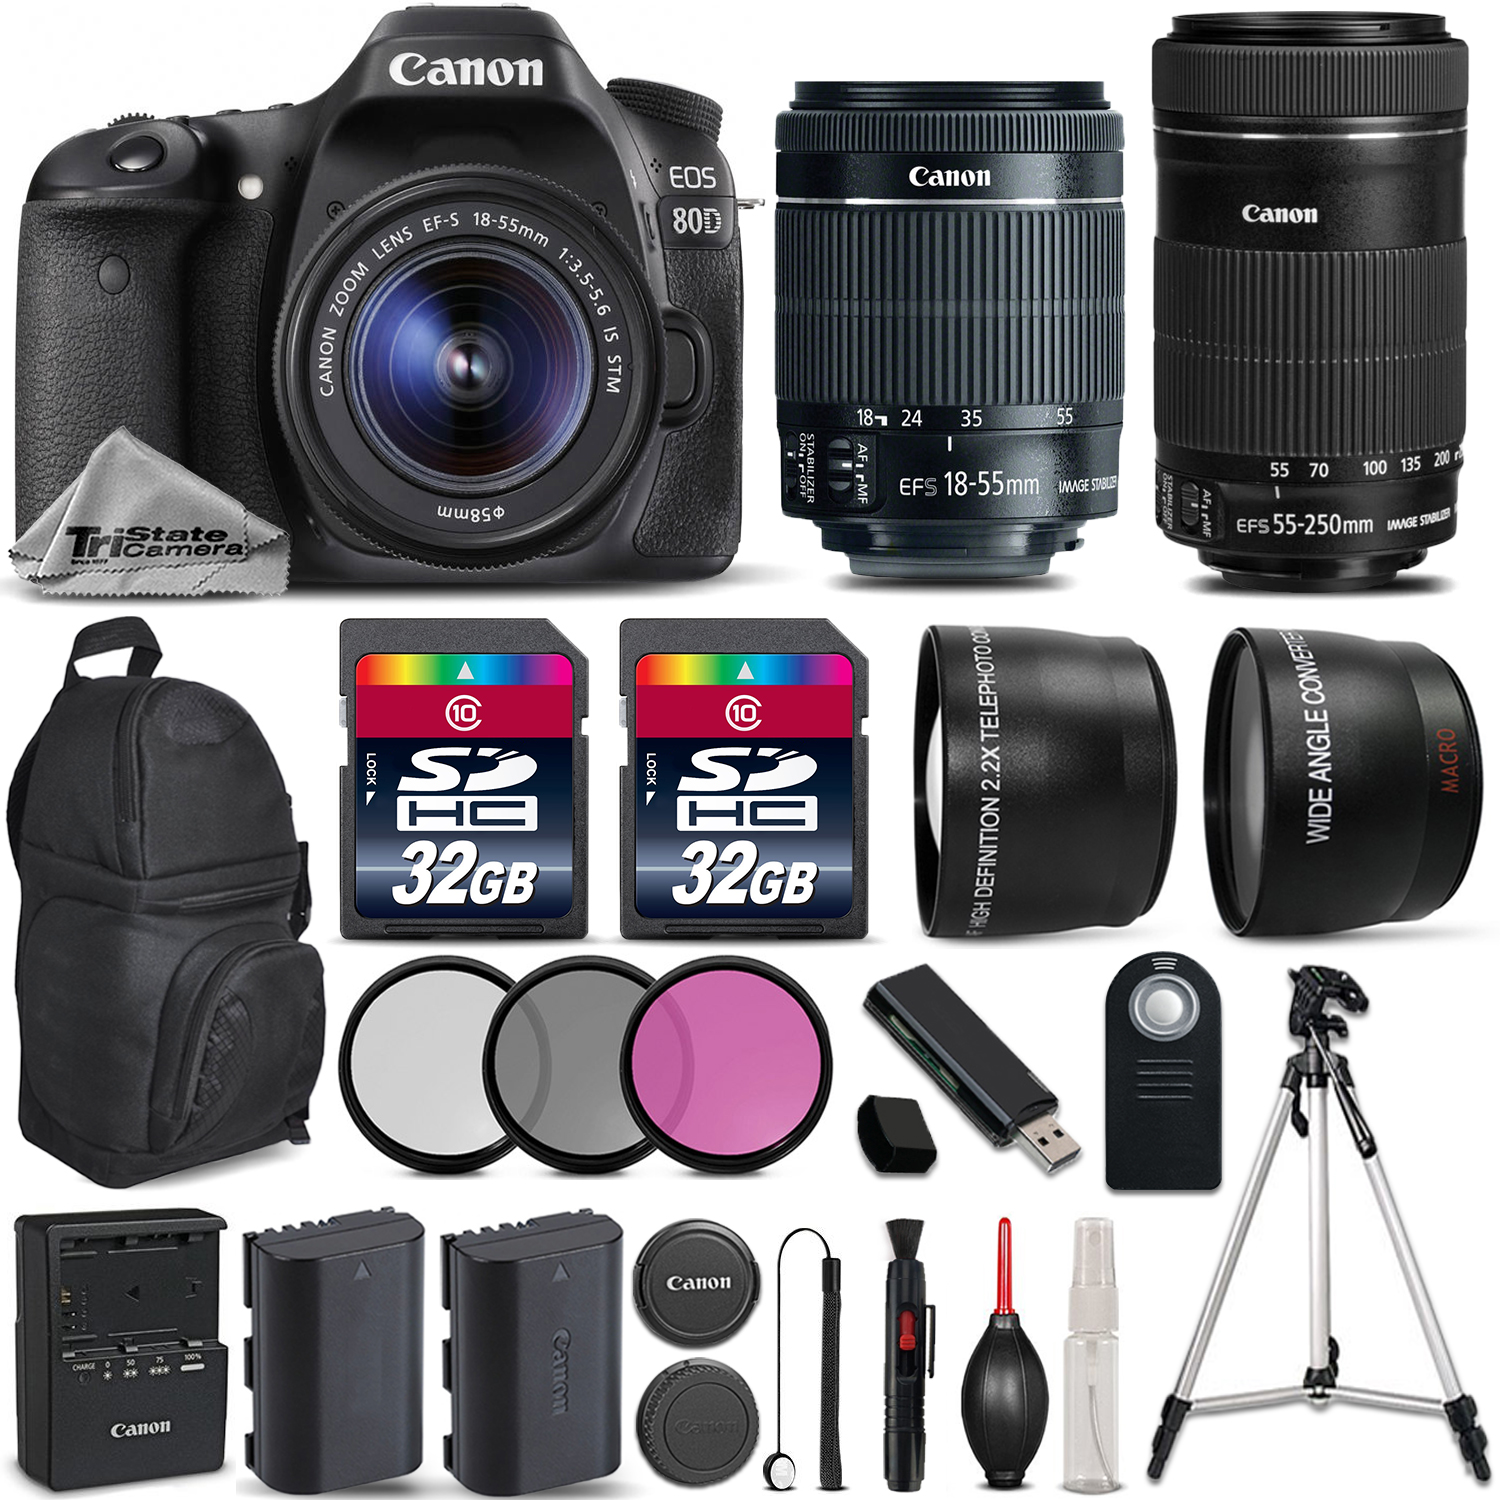 EOS 80D DSLR Camera + 18-55mm IS STM Lens + Canon 55-250 IS STM - PRO KIT *FREE SHIPPING*